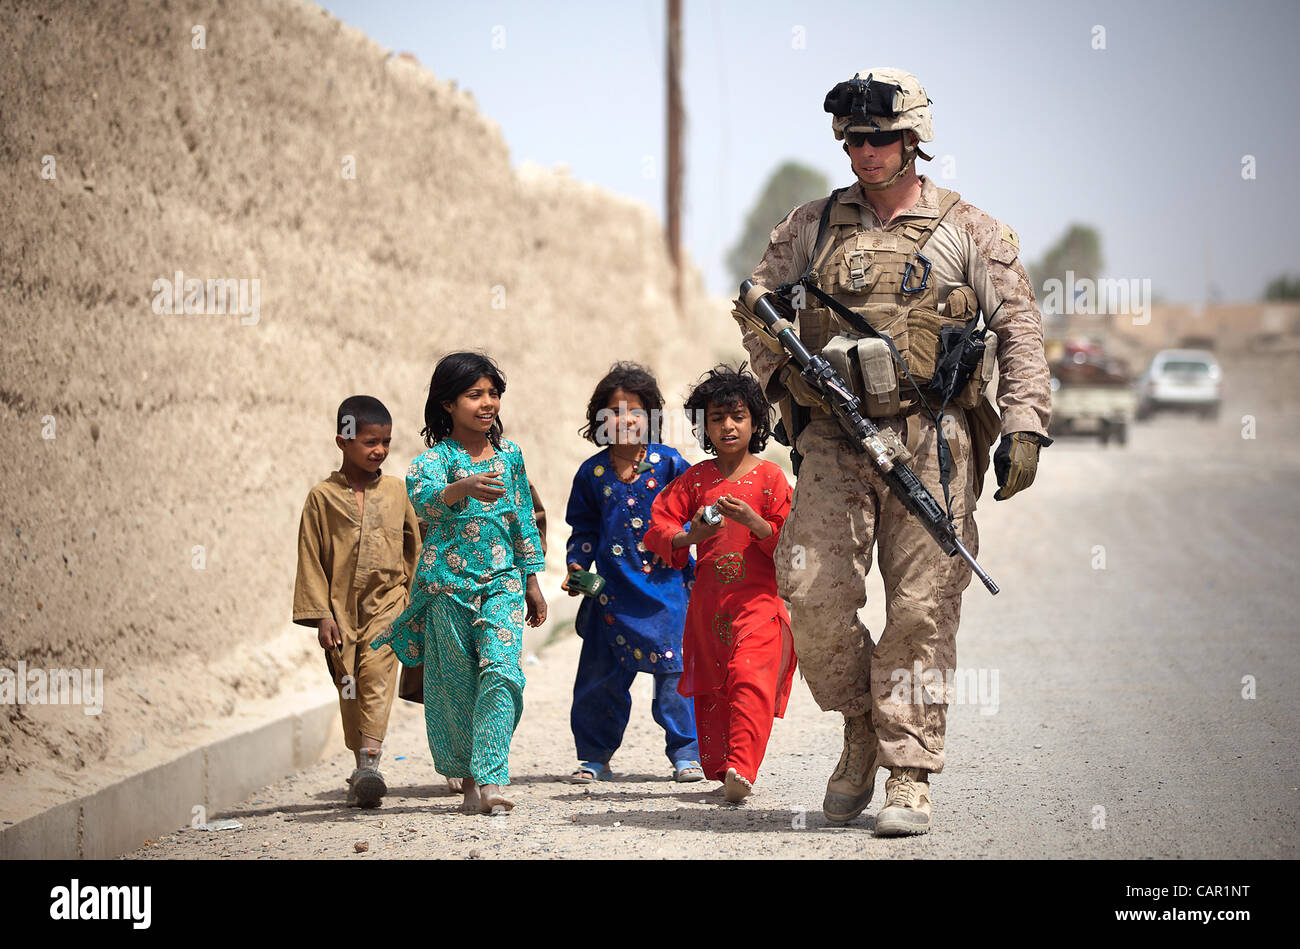 Afghan children walk alongside U.S. Marine Lance Cpl. Jacob Kartchner, a team leader with 4th Platoon, Kilo Company, 3rd Battalion, 3rd Marine Regiment, and 28-year-old native of Long Beach, California as he patrols with fellow Marines and Afghan National Guard Stock Photo